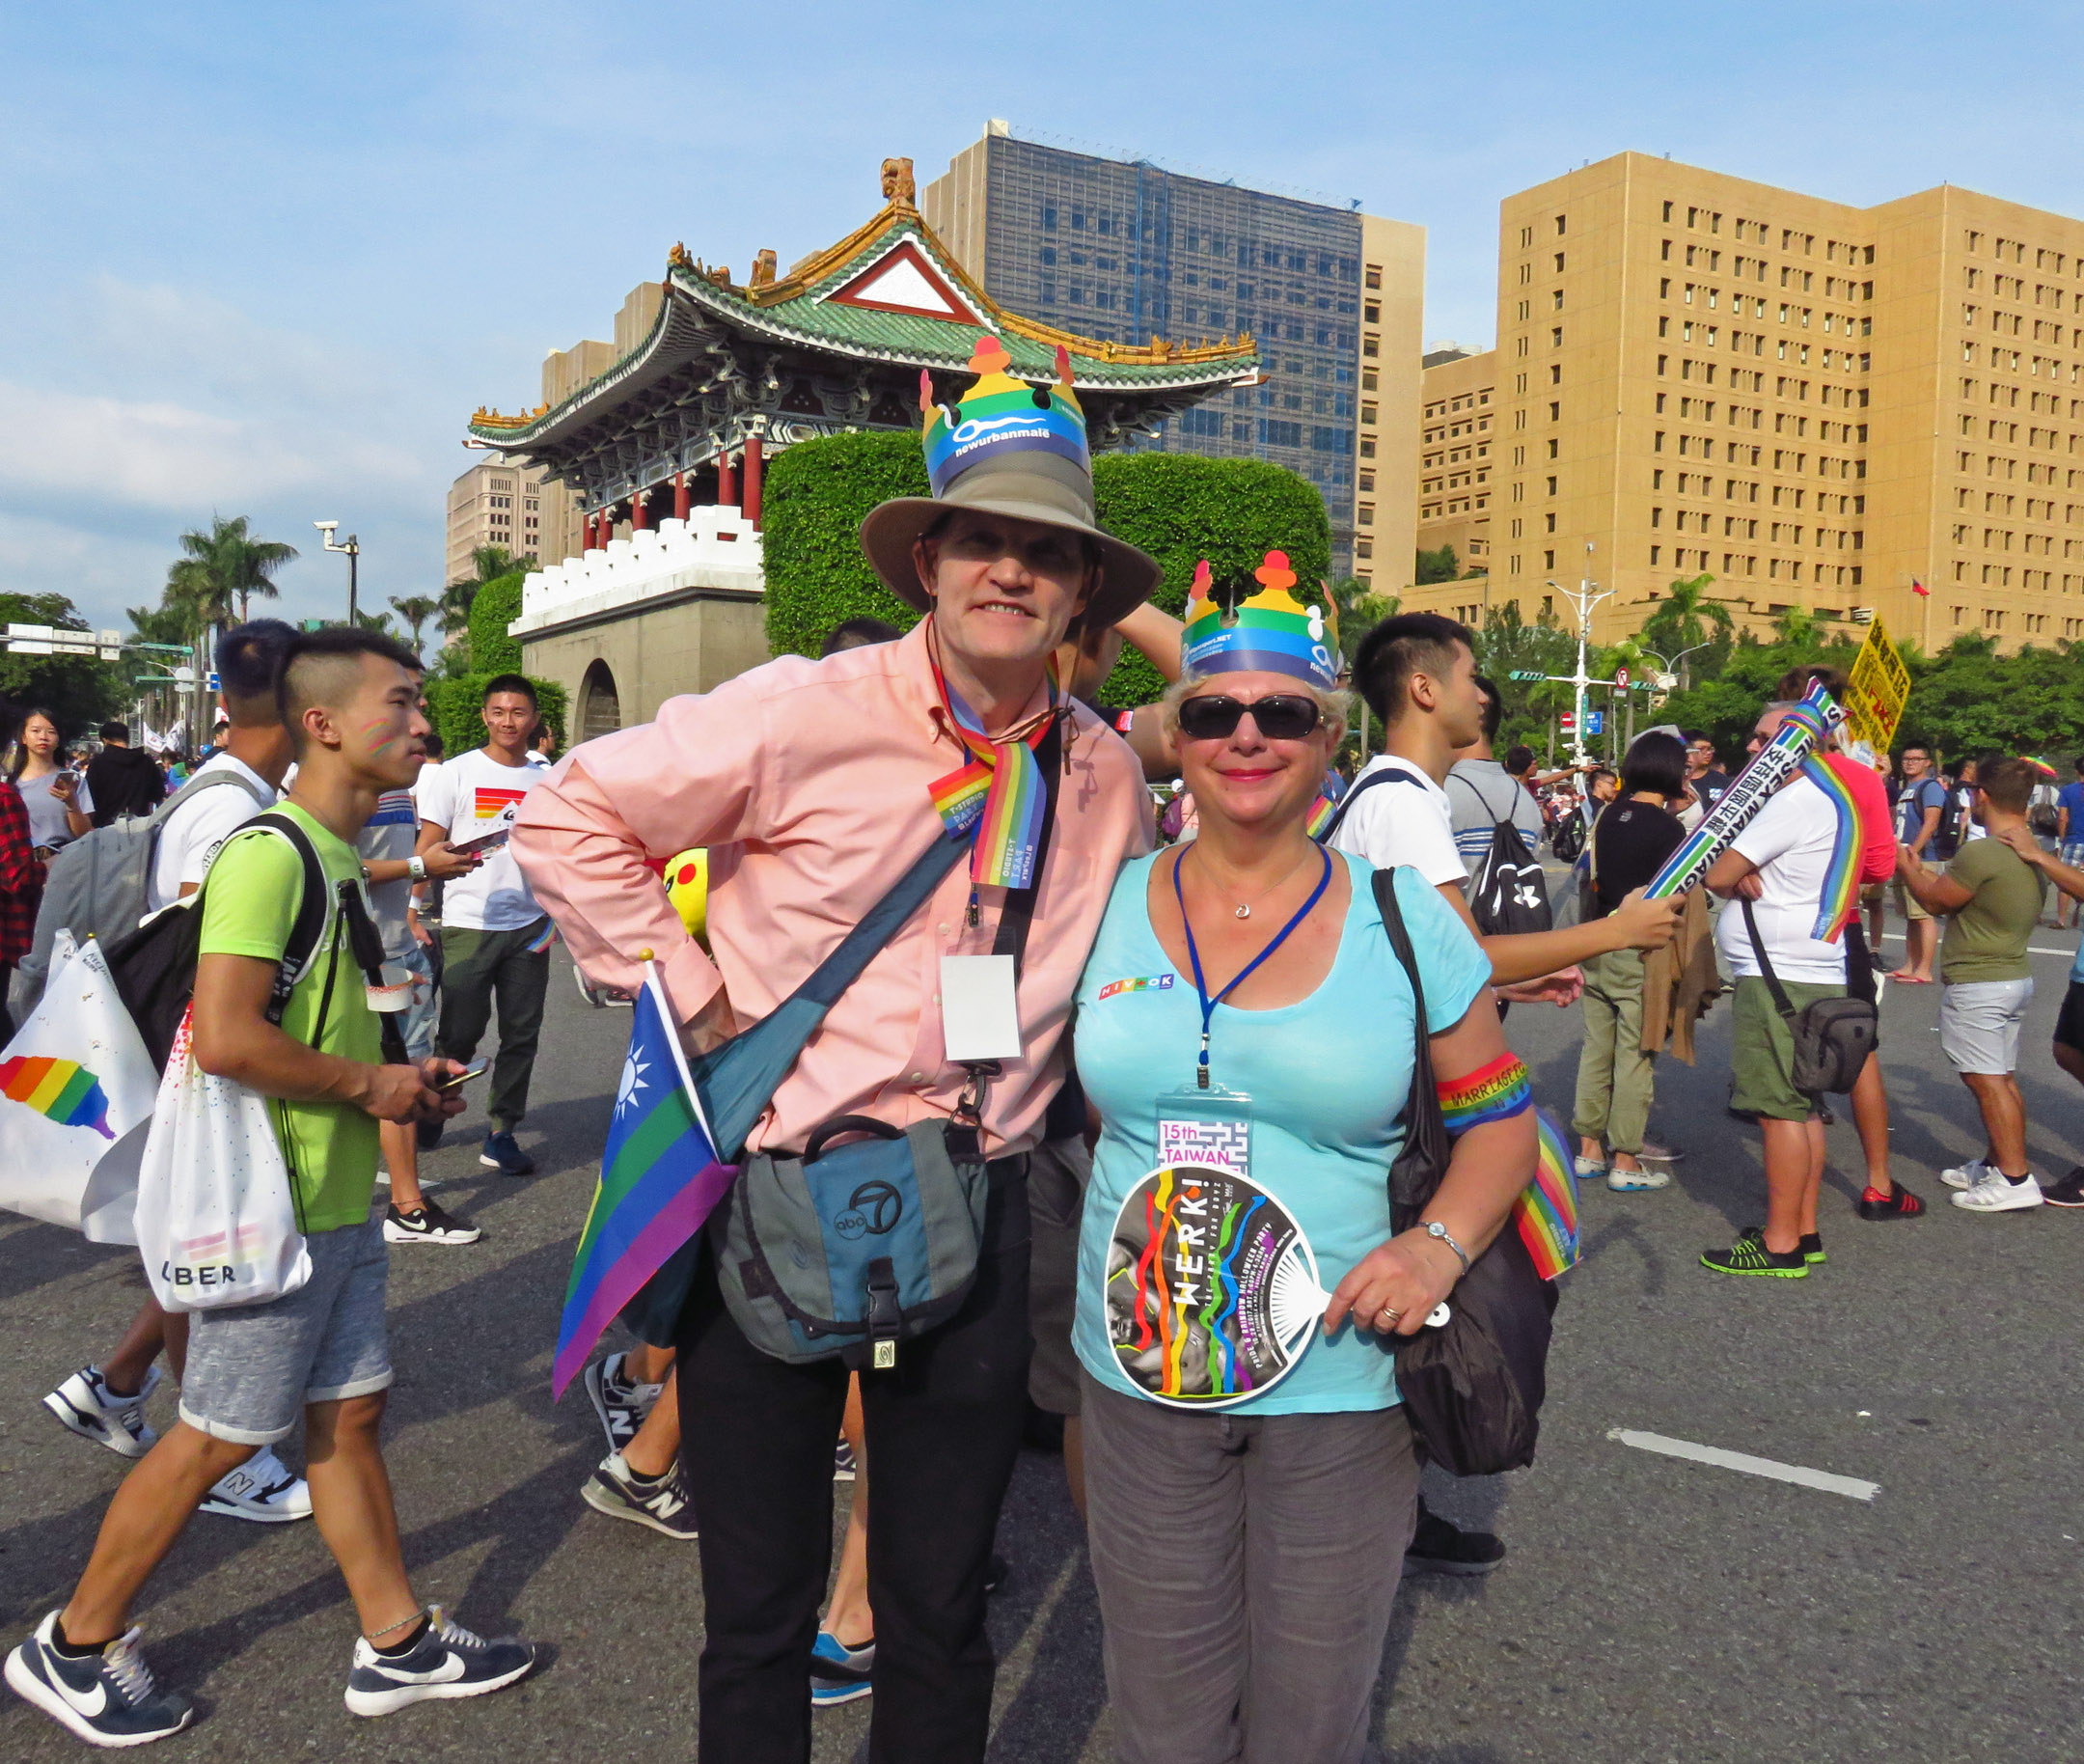 2. Ed and Emma at the Pride Parade in Taipei